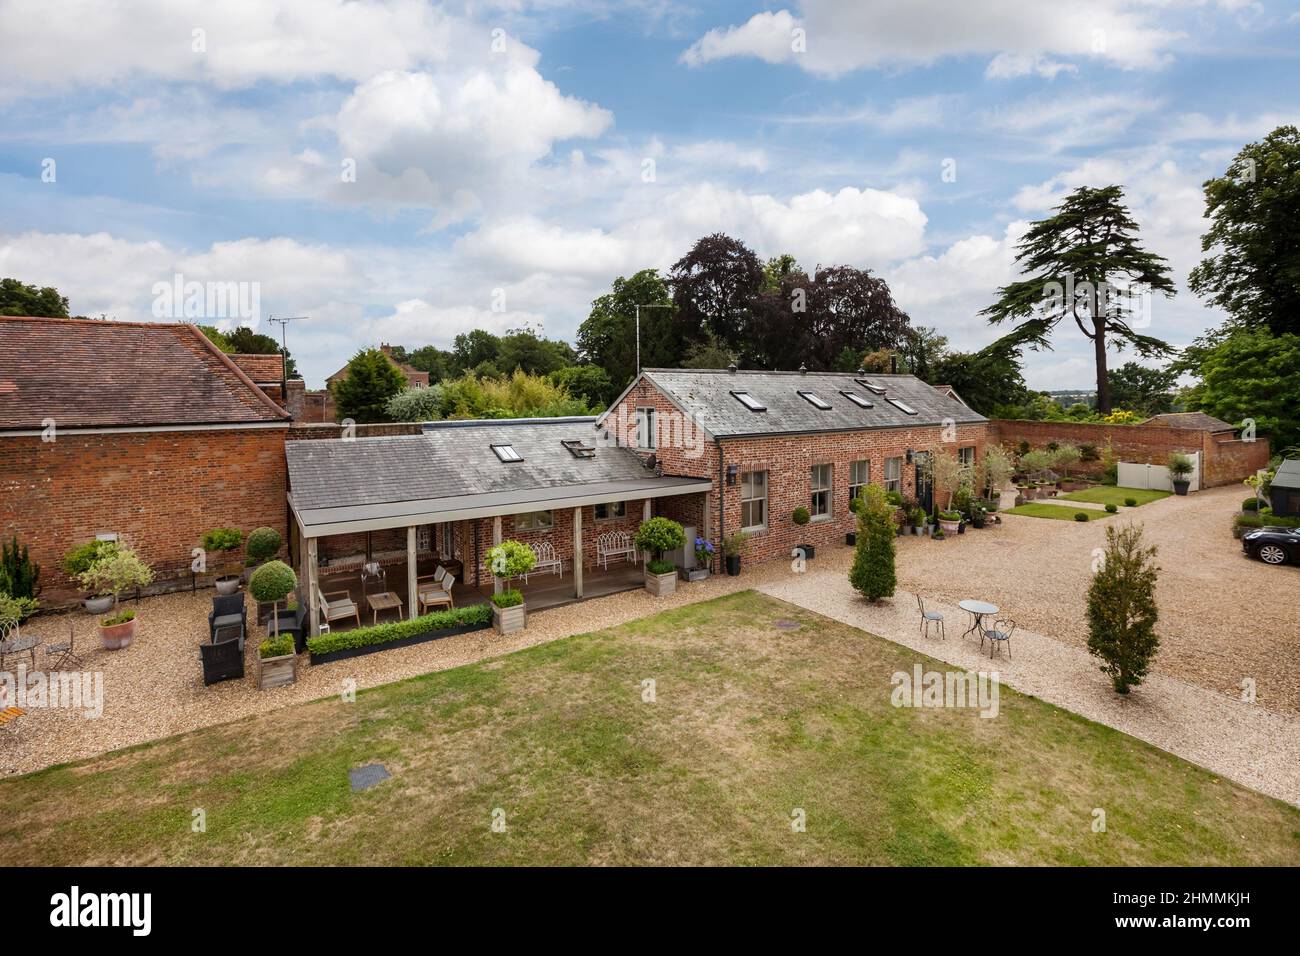 Newport, Essex - July 10 2018: Old farm out building converted into luxurious countryside home within charming landscaped gardens Stock Photo